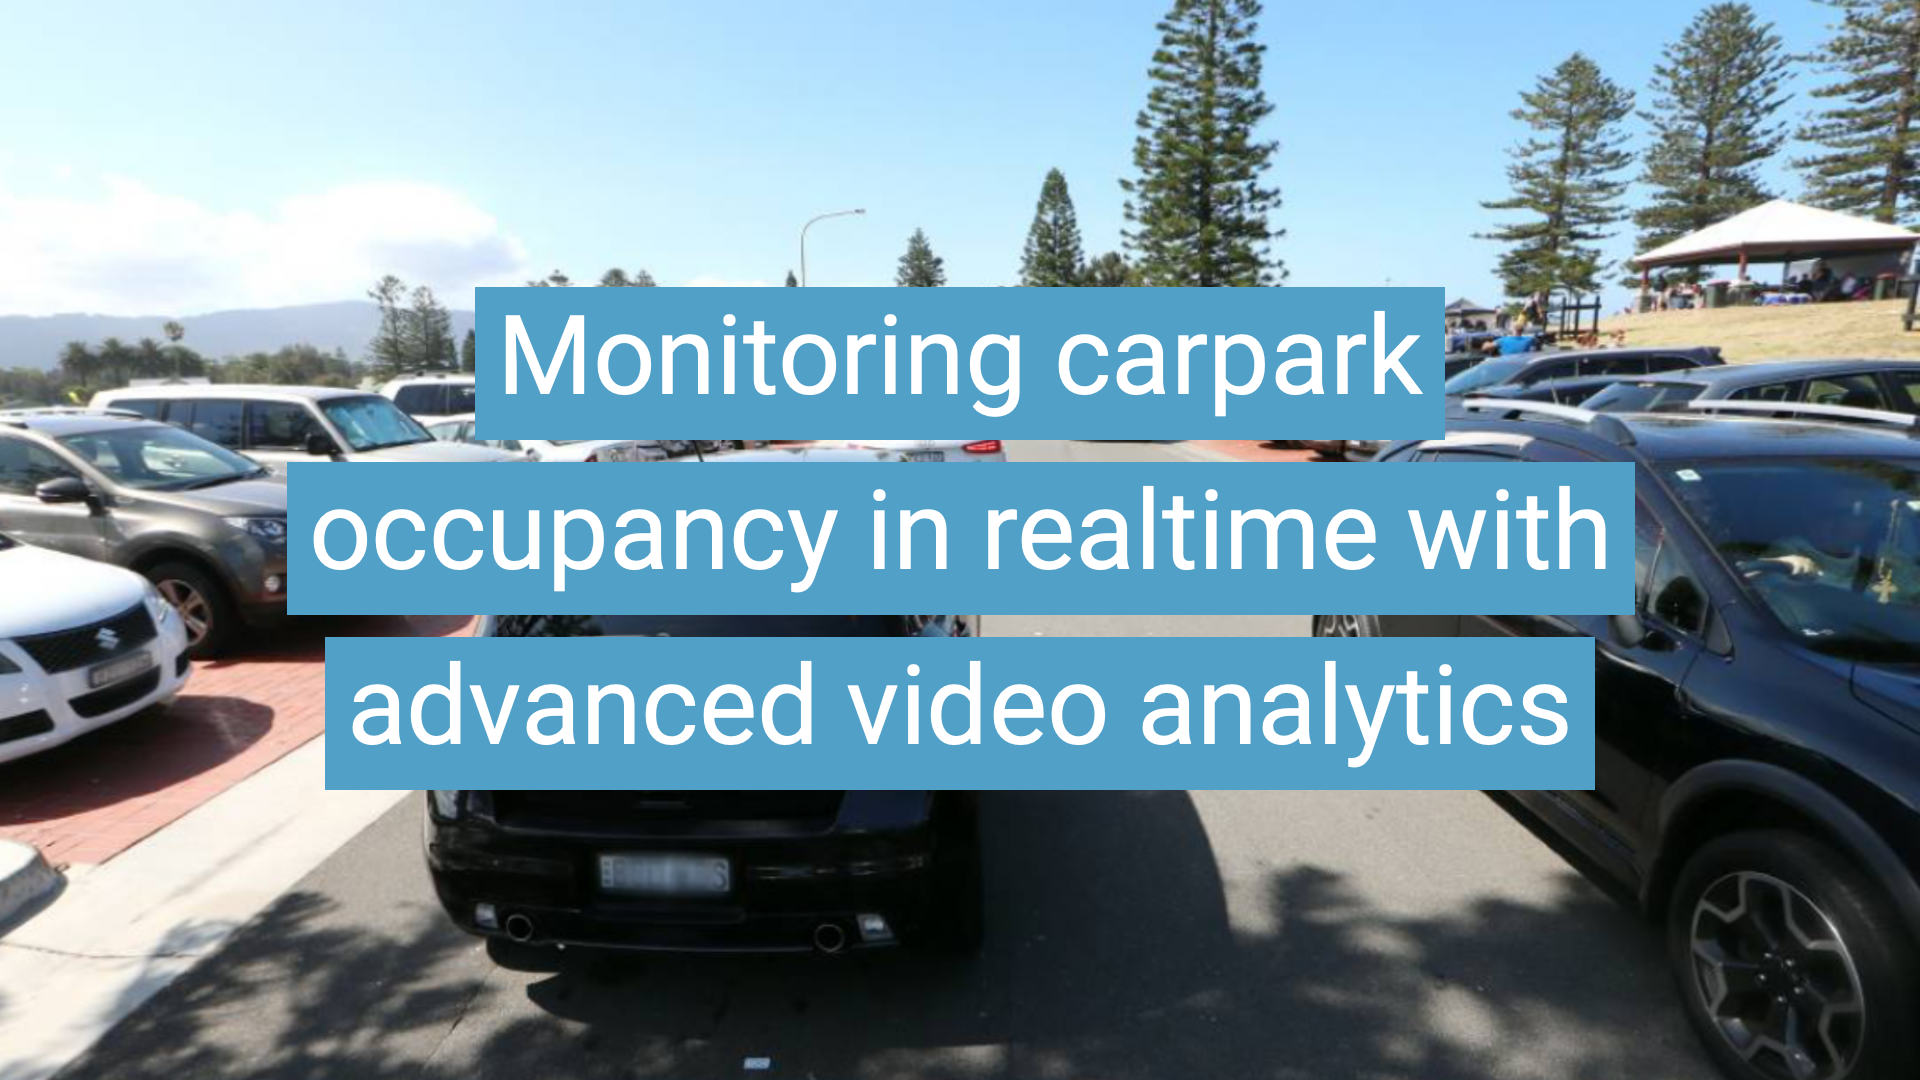 Car Park Monitoring with Advanced Video Analytics Technology